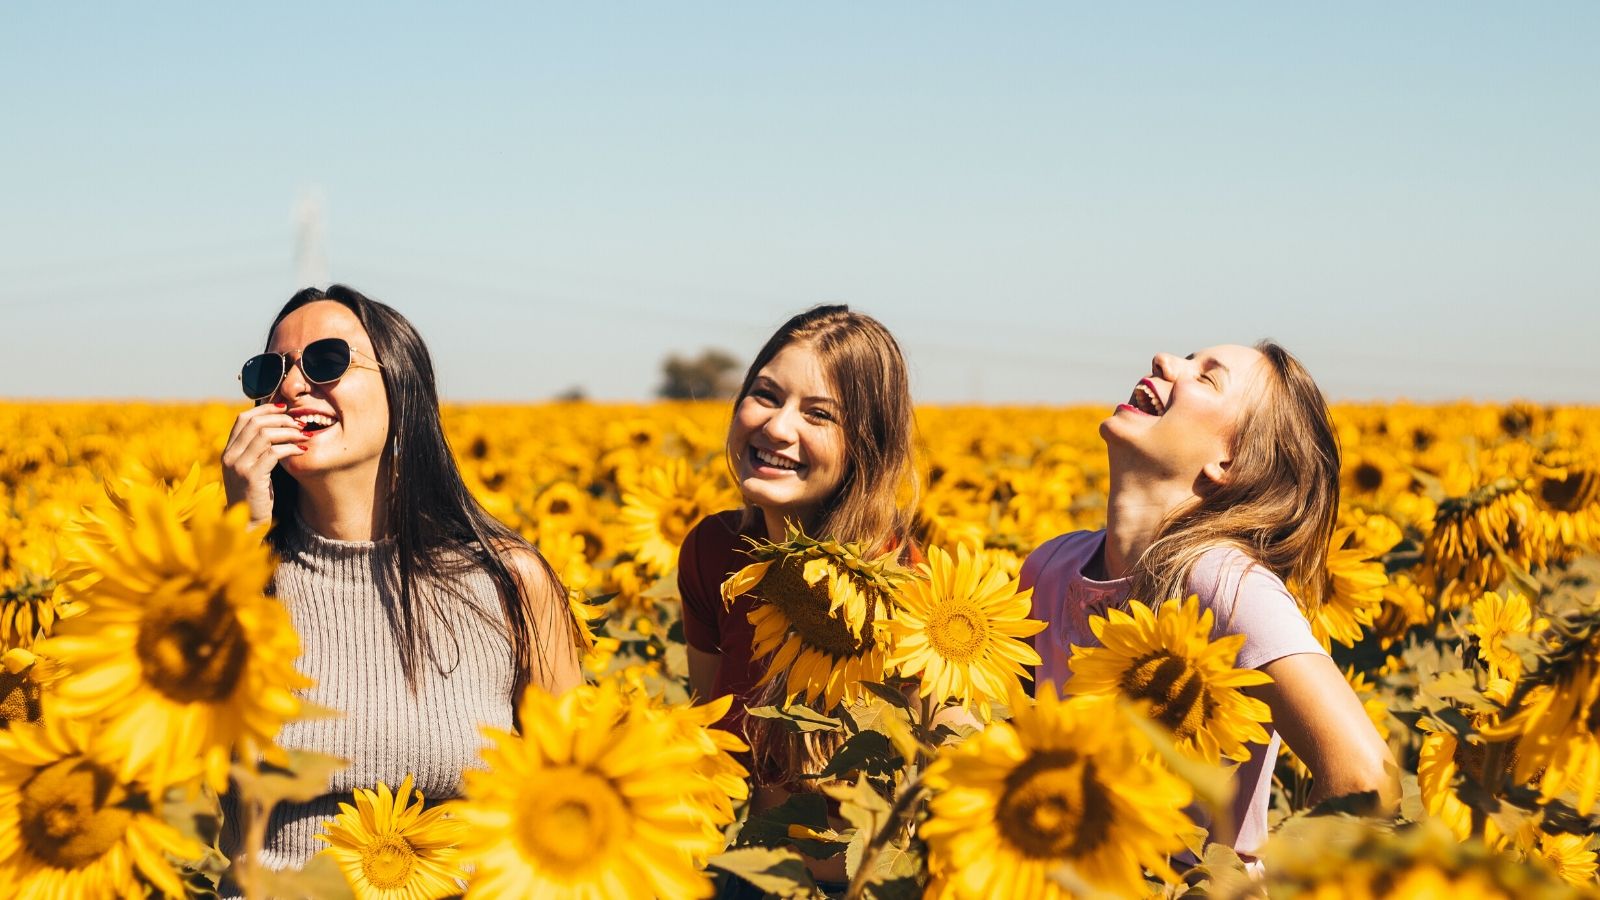 Three girls laugh while frolicking in a field of sunflowers.